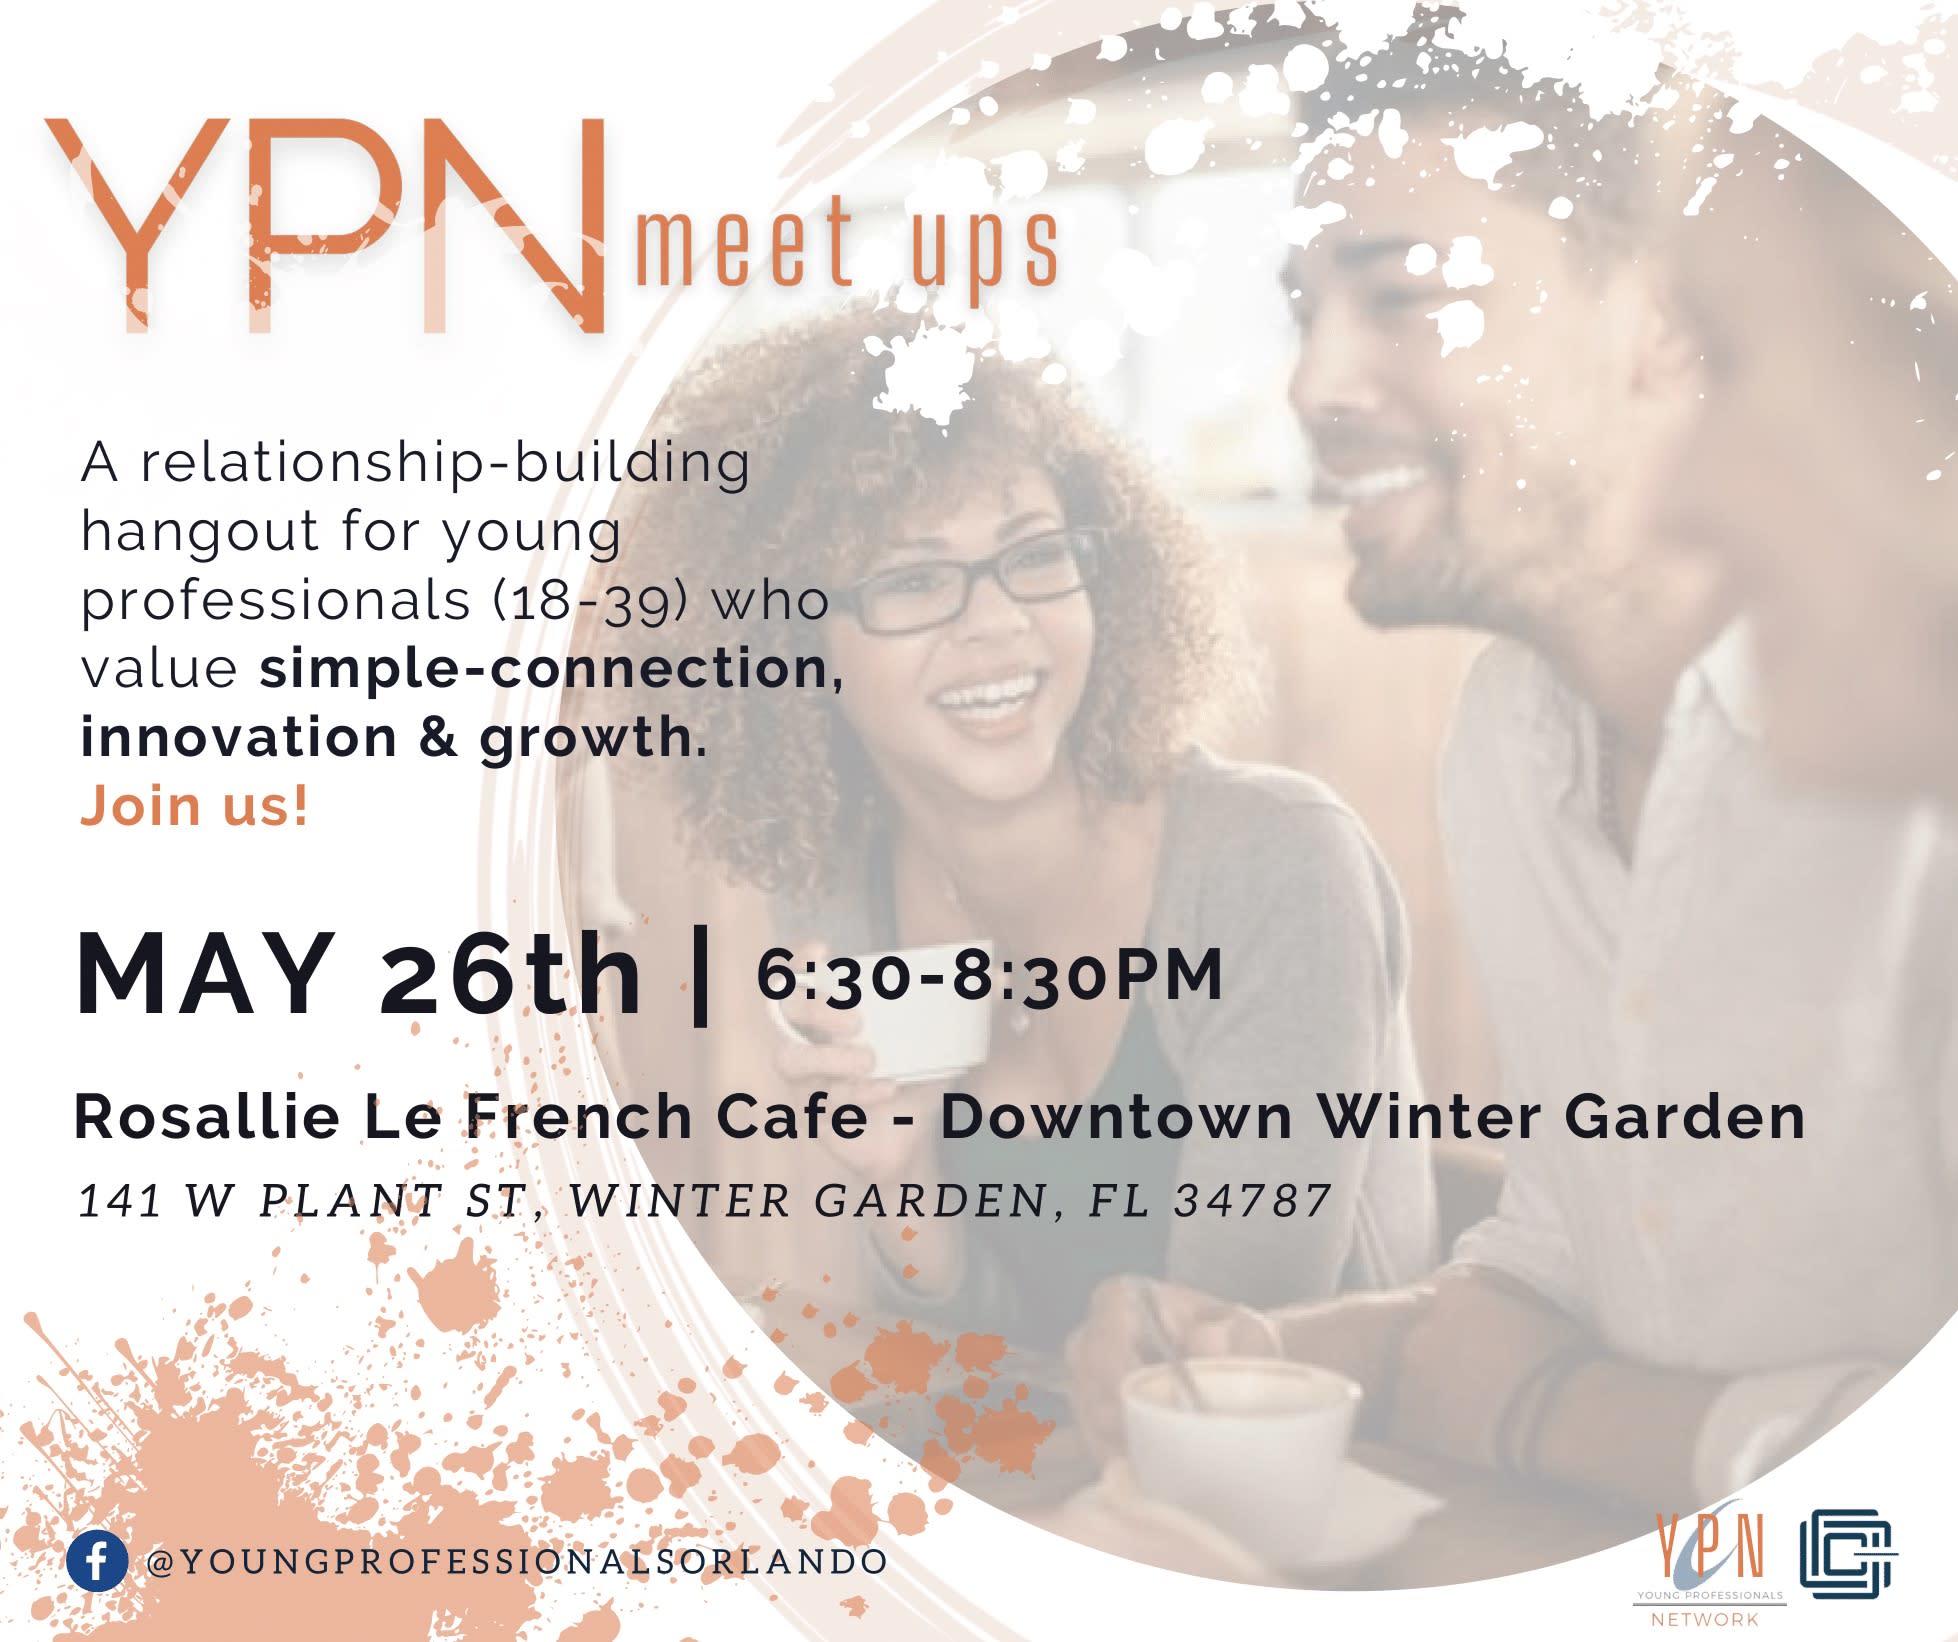 YPN Meet-up, Central Florida Christian Chamber of Commerce